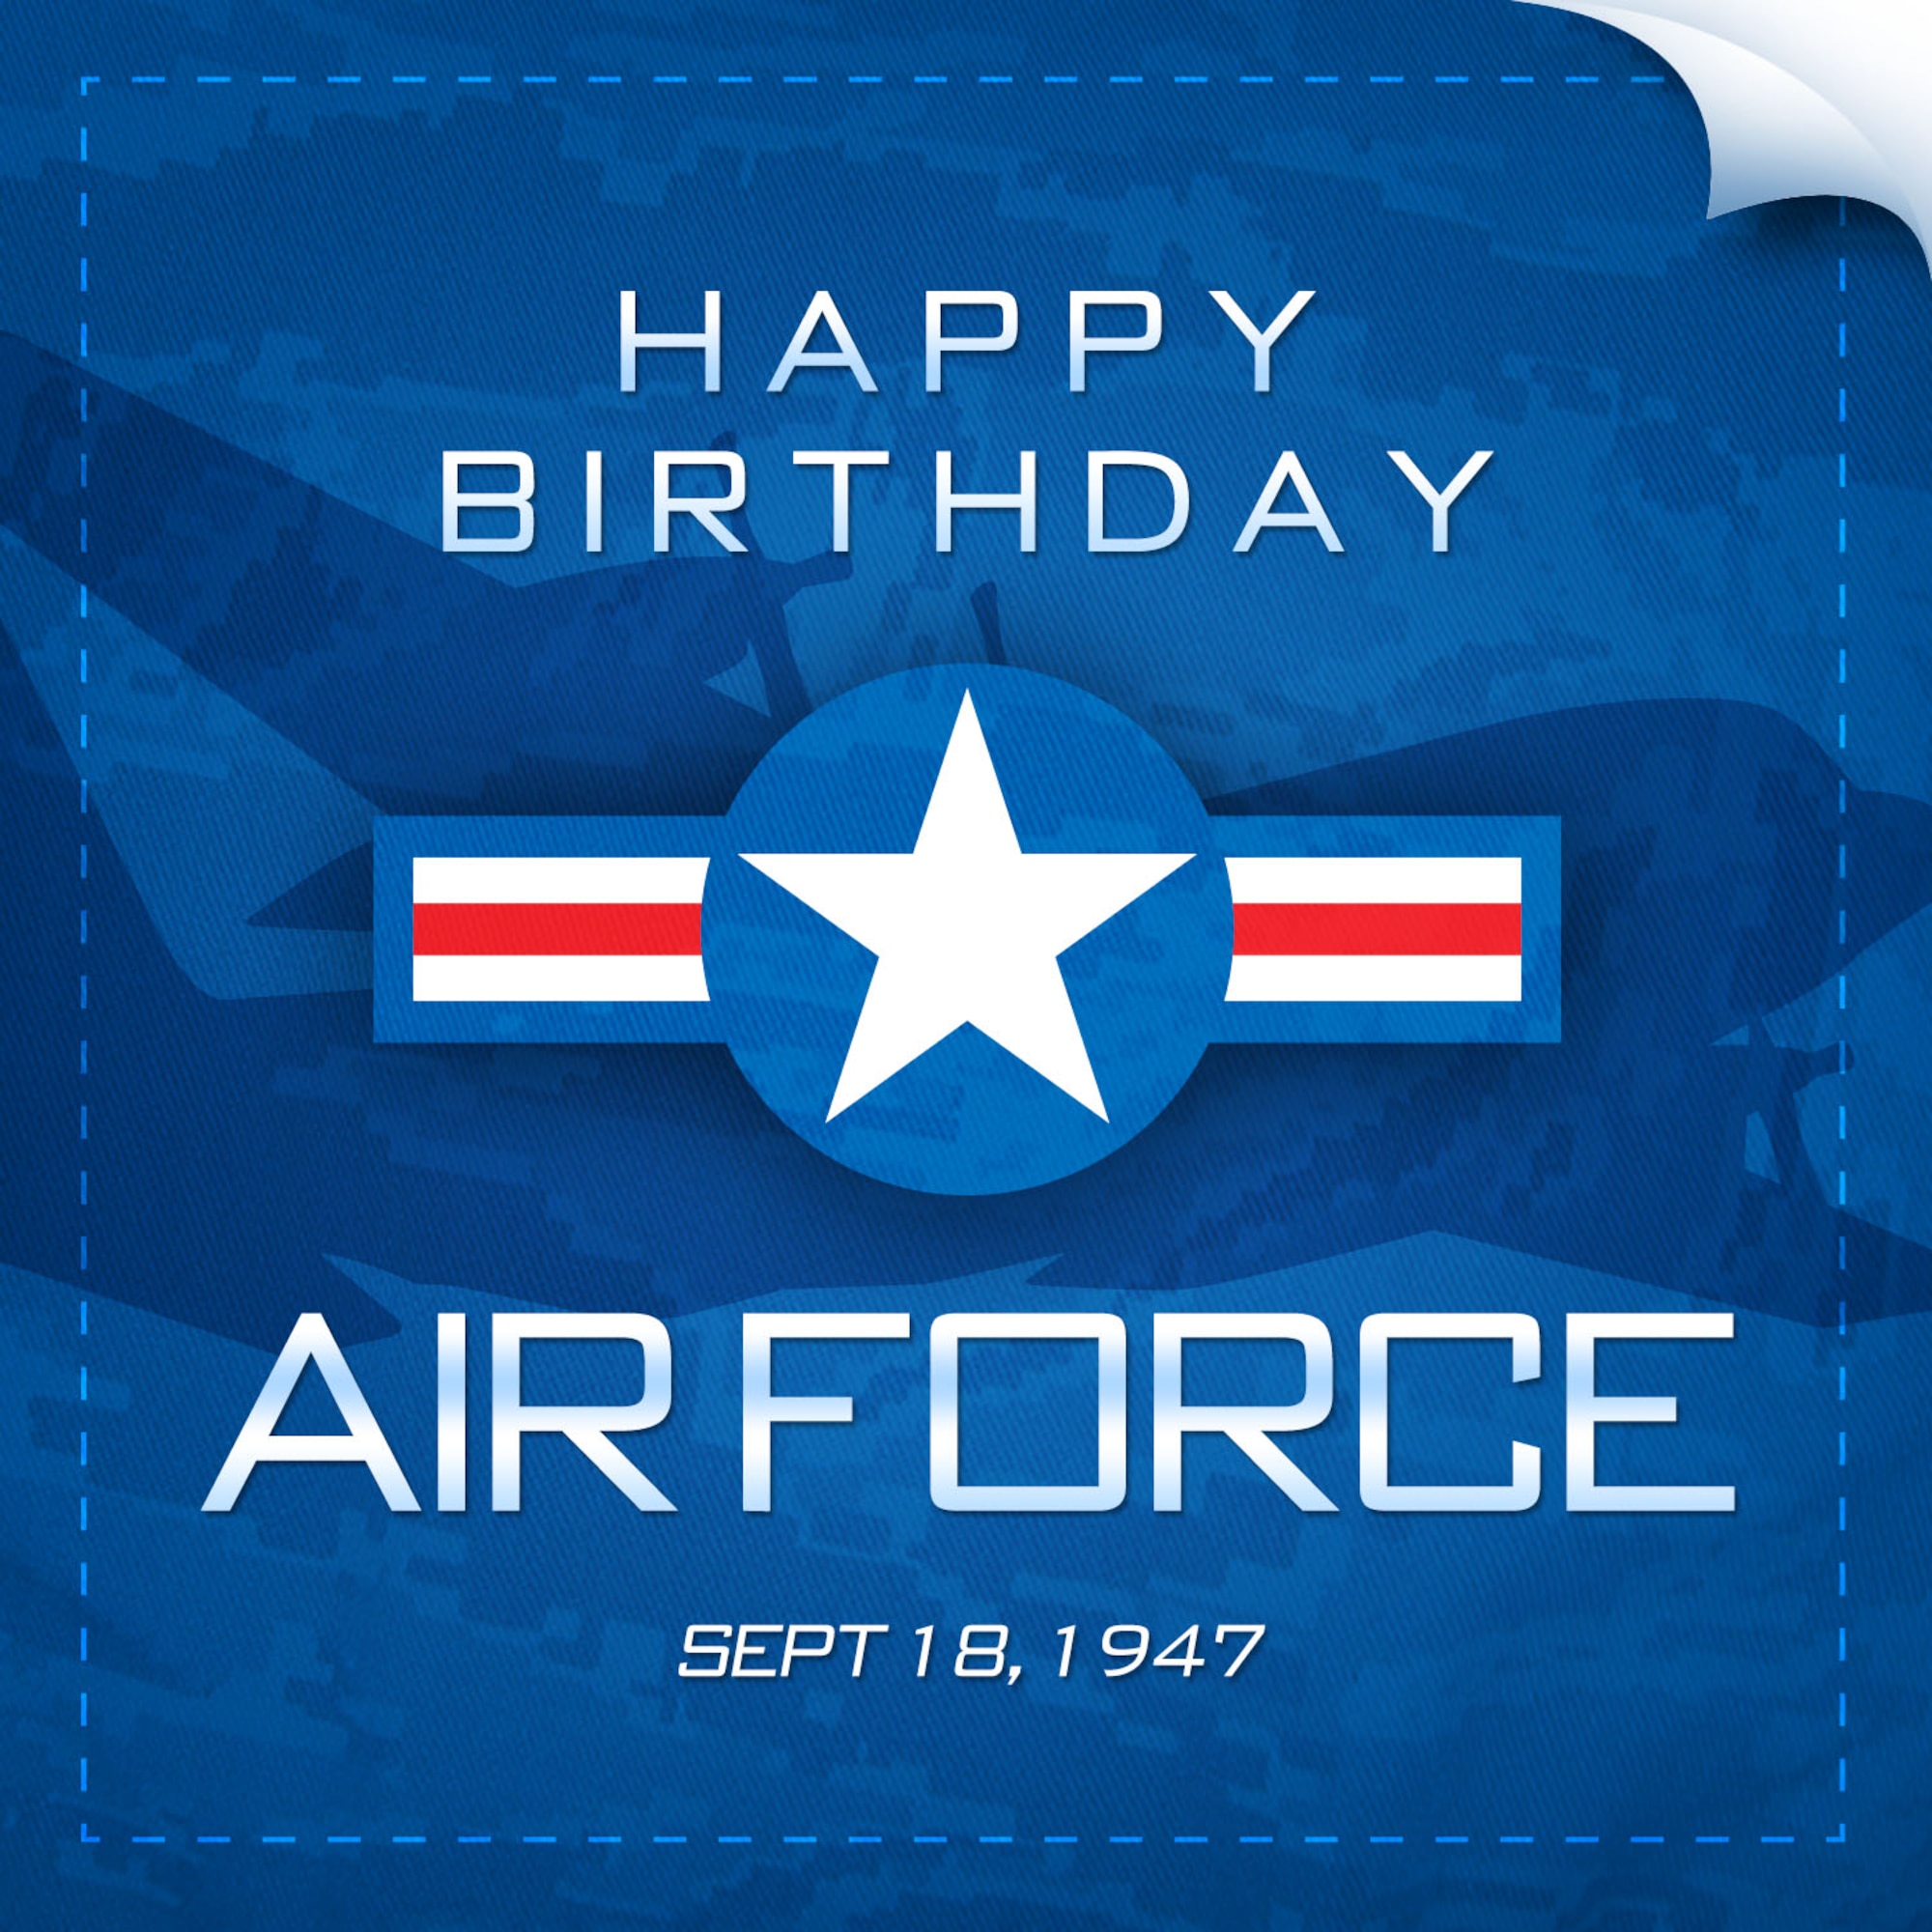 Team Patrick-Cape is invited to attend the Air Force’s 68th birthday celebration, Sept. 18, 2015, at the Patrick AFB Golf Course, from noon to 2 p.m. For more information contact the Force Support Squadron at (321) 494-9691/9692. This event has been approved as an alternate duty location. (U.S. Air Force graphic/James Rainier) 